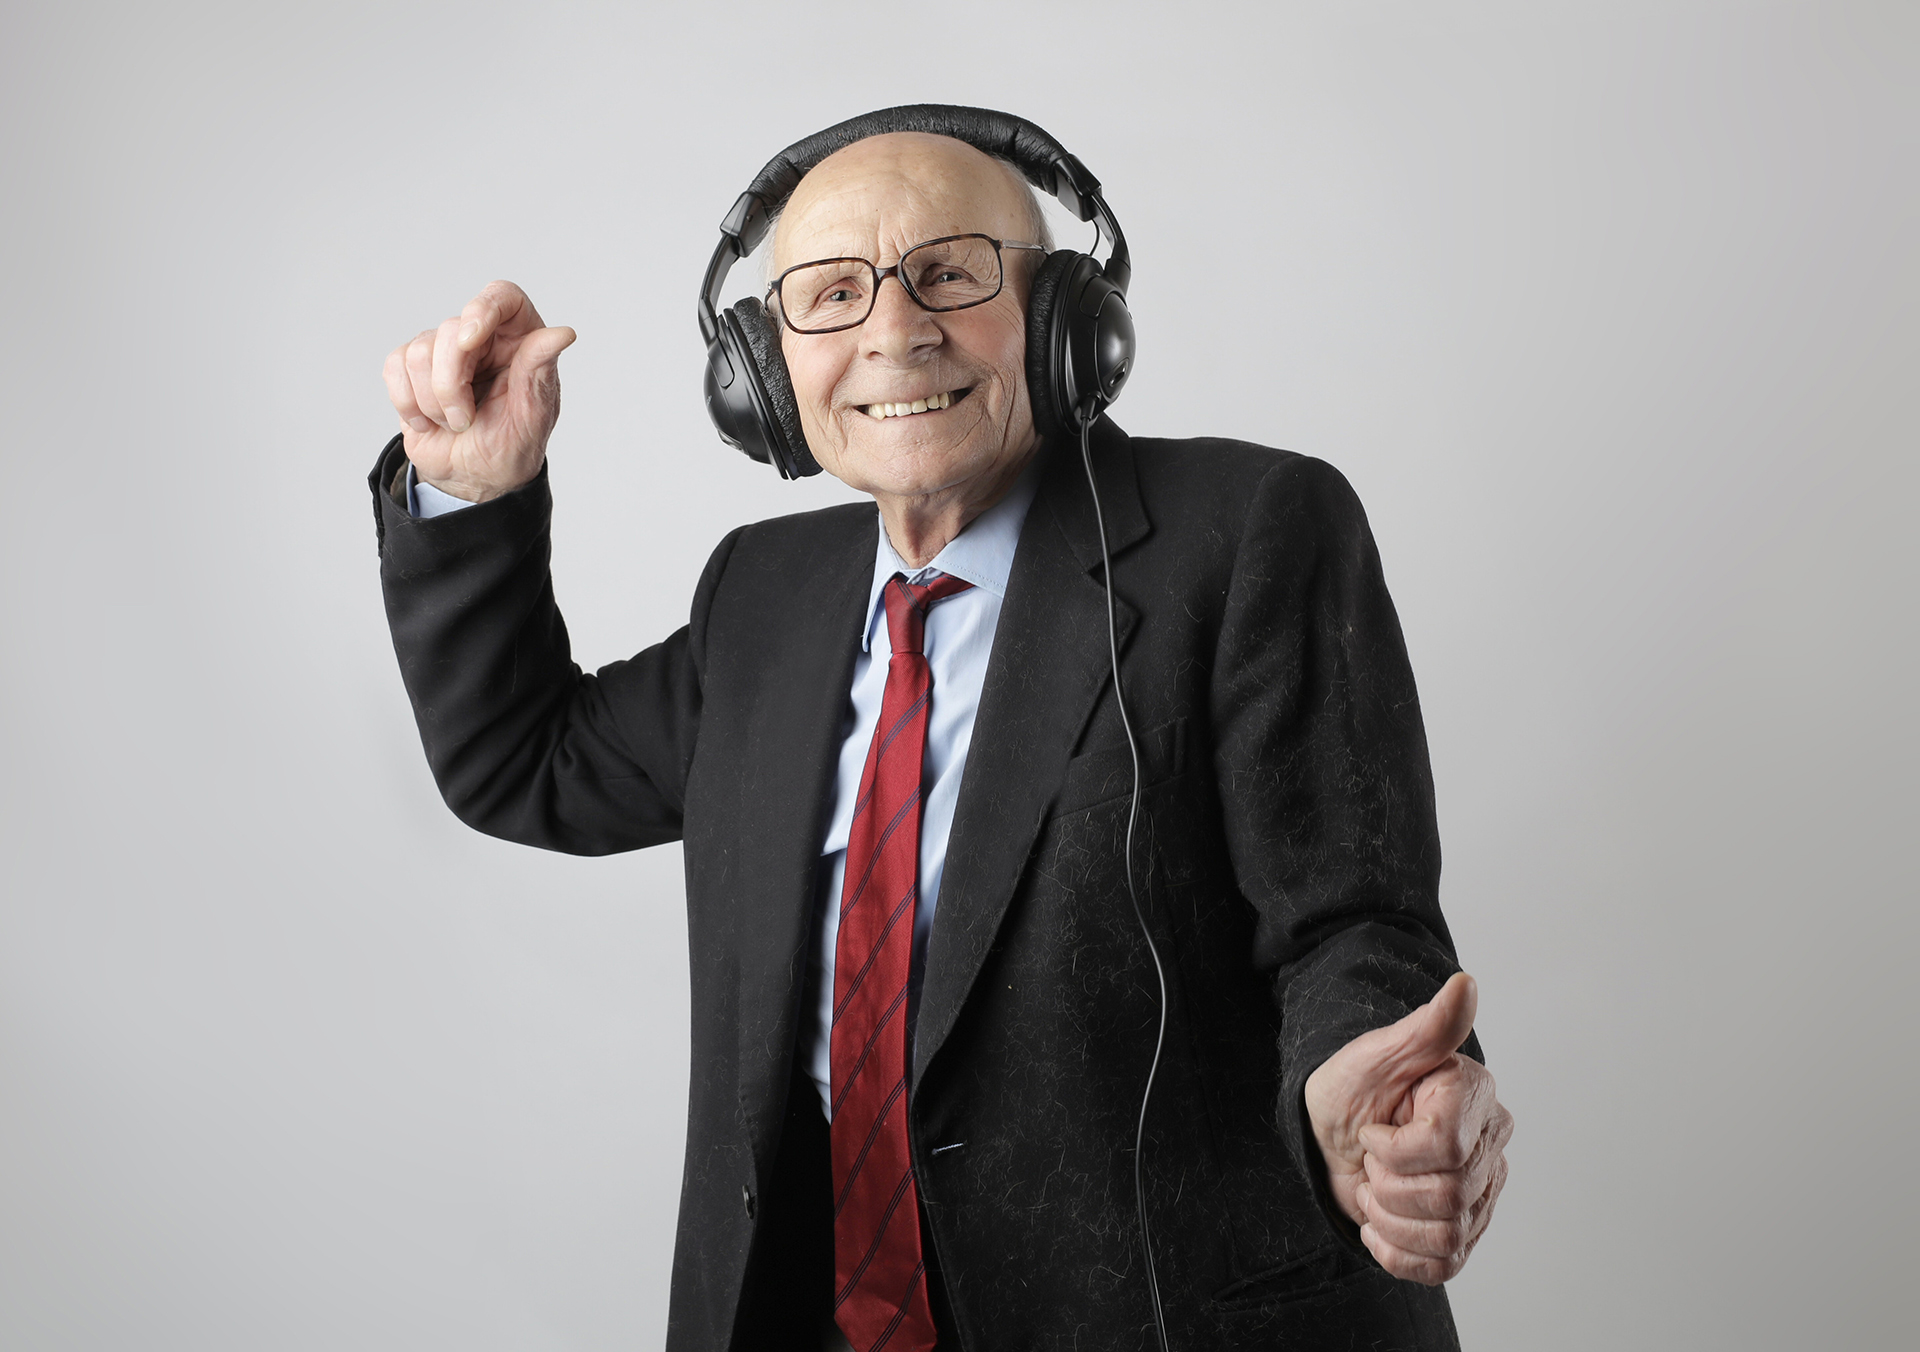 Old man dancing. Hearing loss levels. Hearing Loss Help - Forums and Discussions